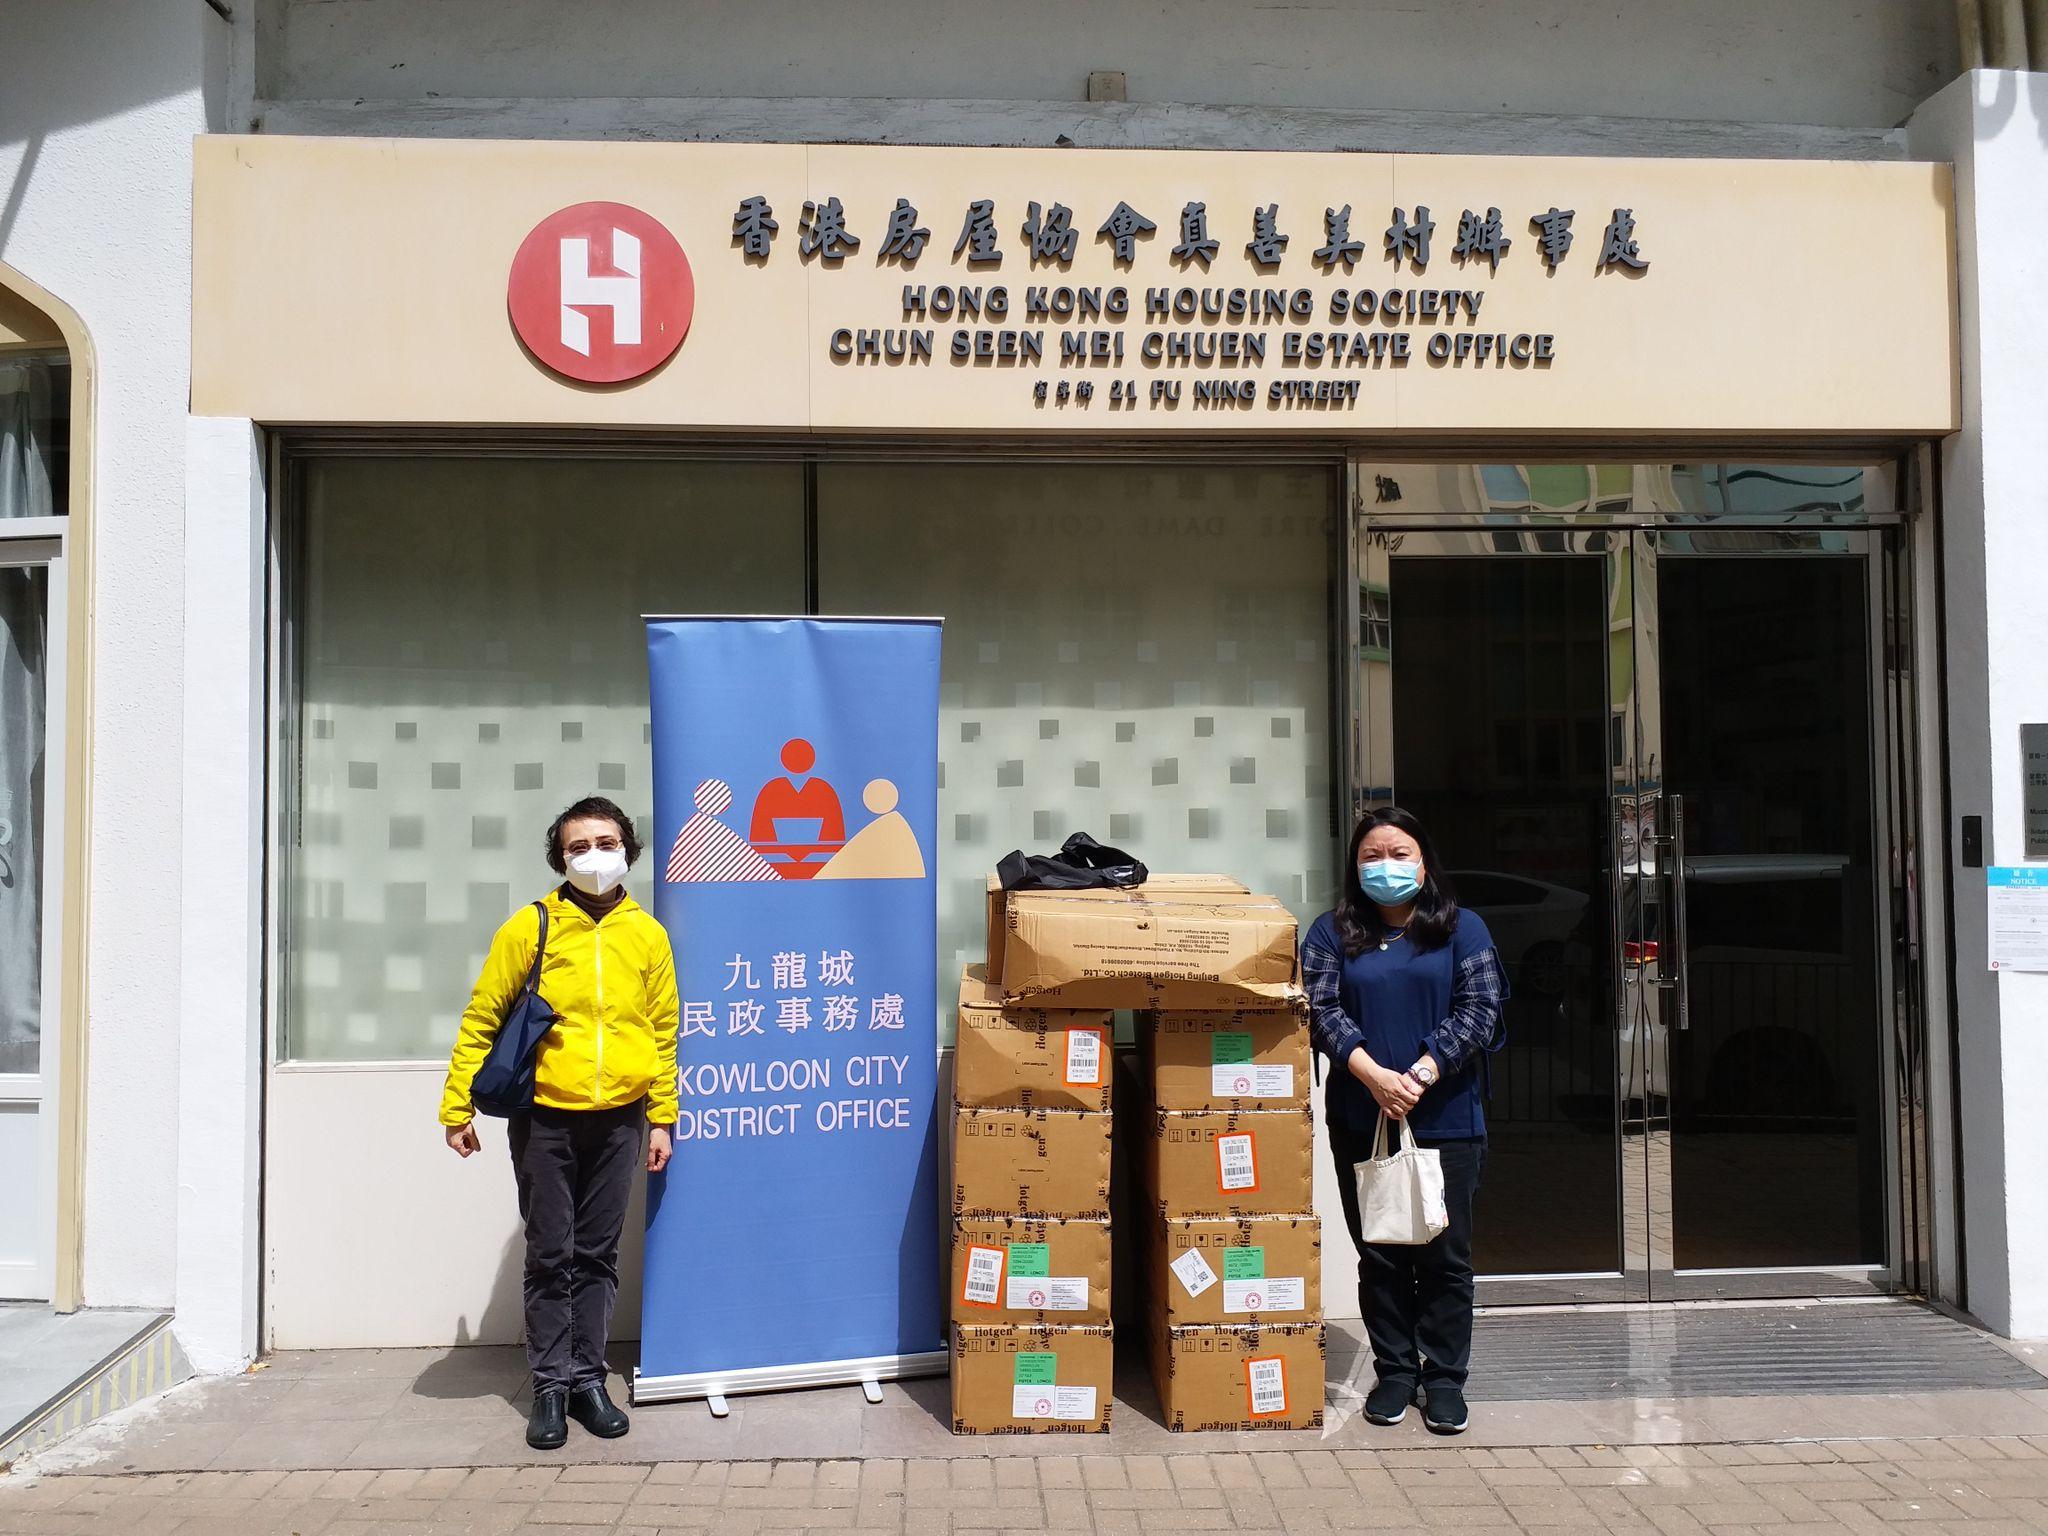 The Kowloon City District Office today (March 7) distributed COVID-19 rapid test kits to households, cleansing workers and property management staff living and working in Chun Seen Mei Chuen for voluntary testing through the property management company.